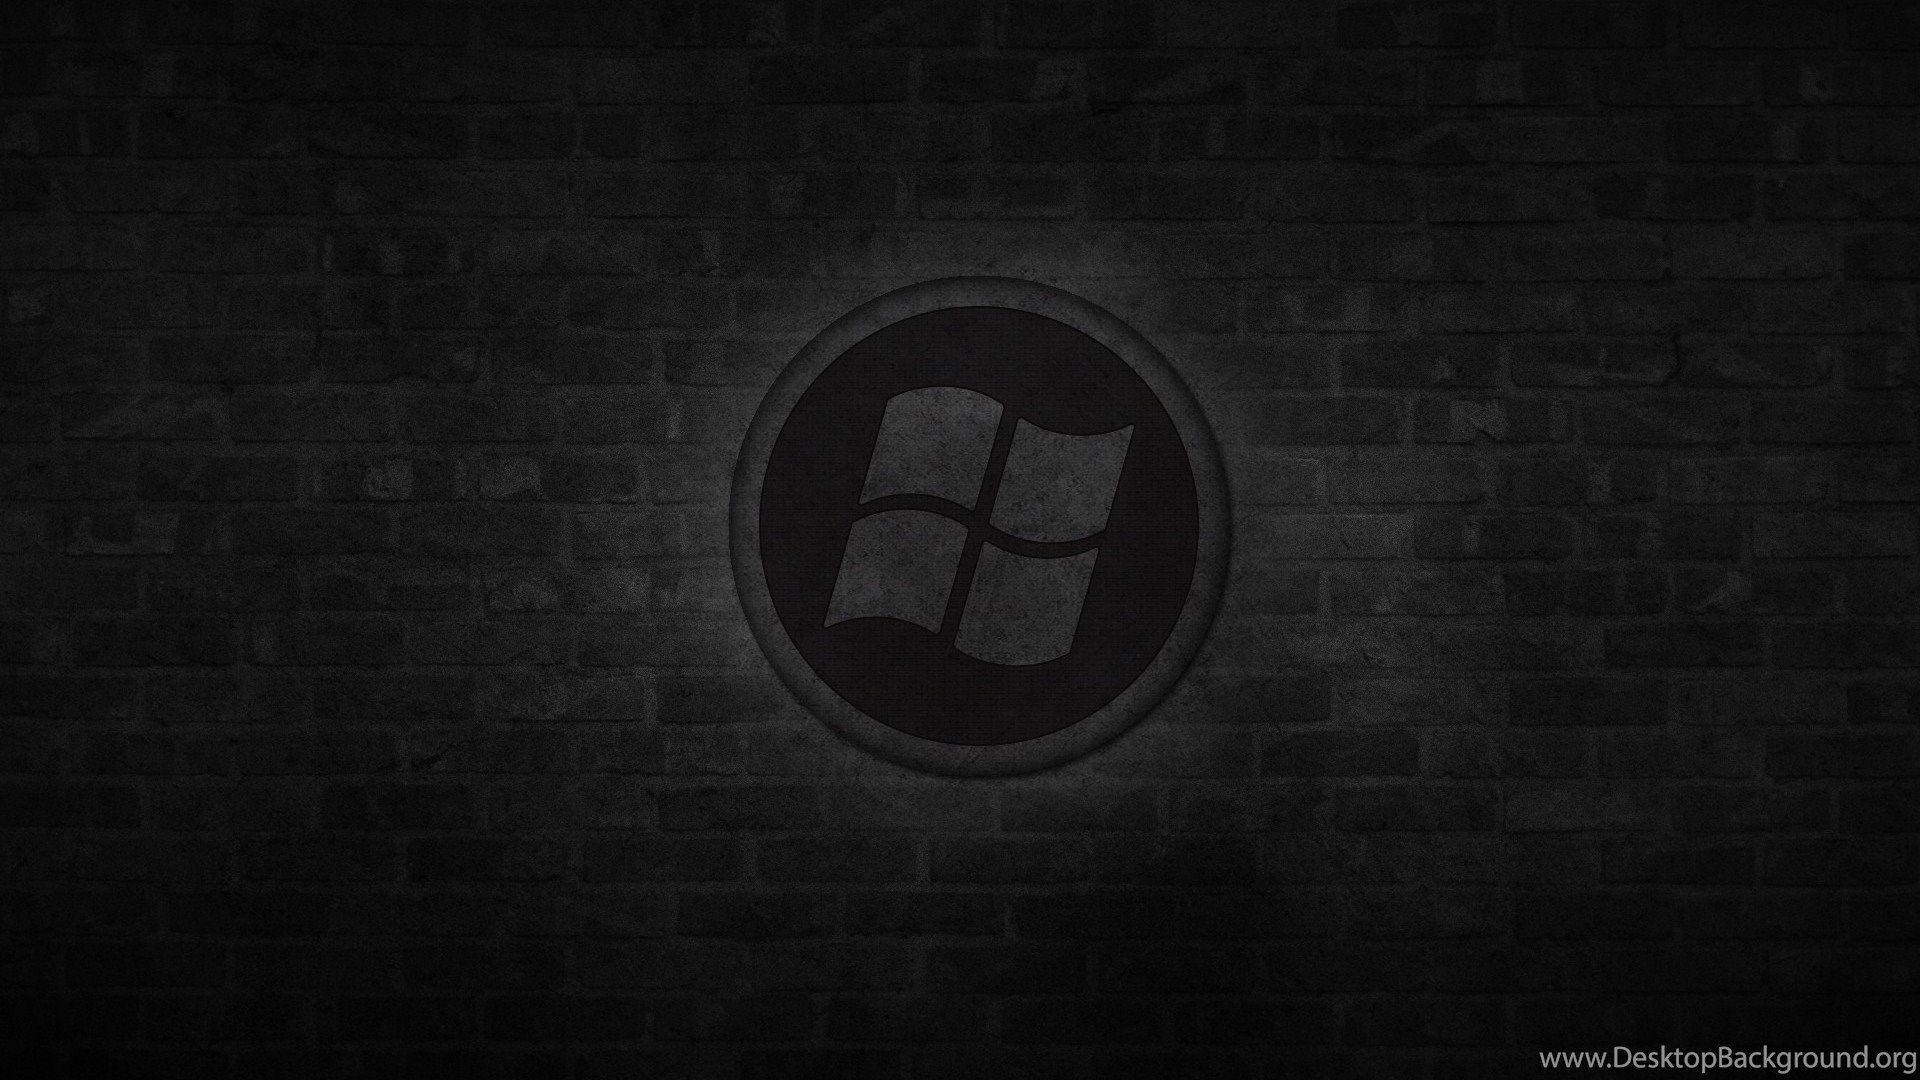 Dark Windows Logo - Windows: Dark Windows Logo Tech Hi Free Wallpapers For HD 16:9 ...